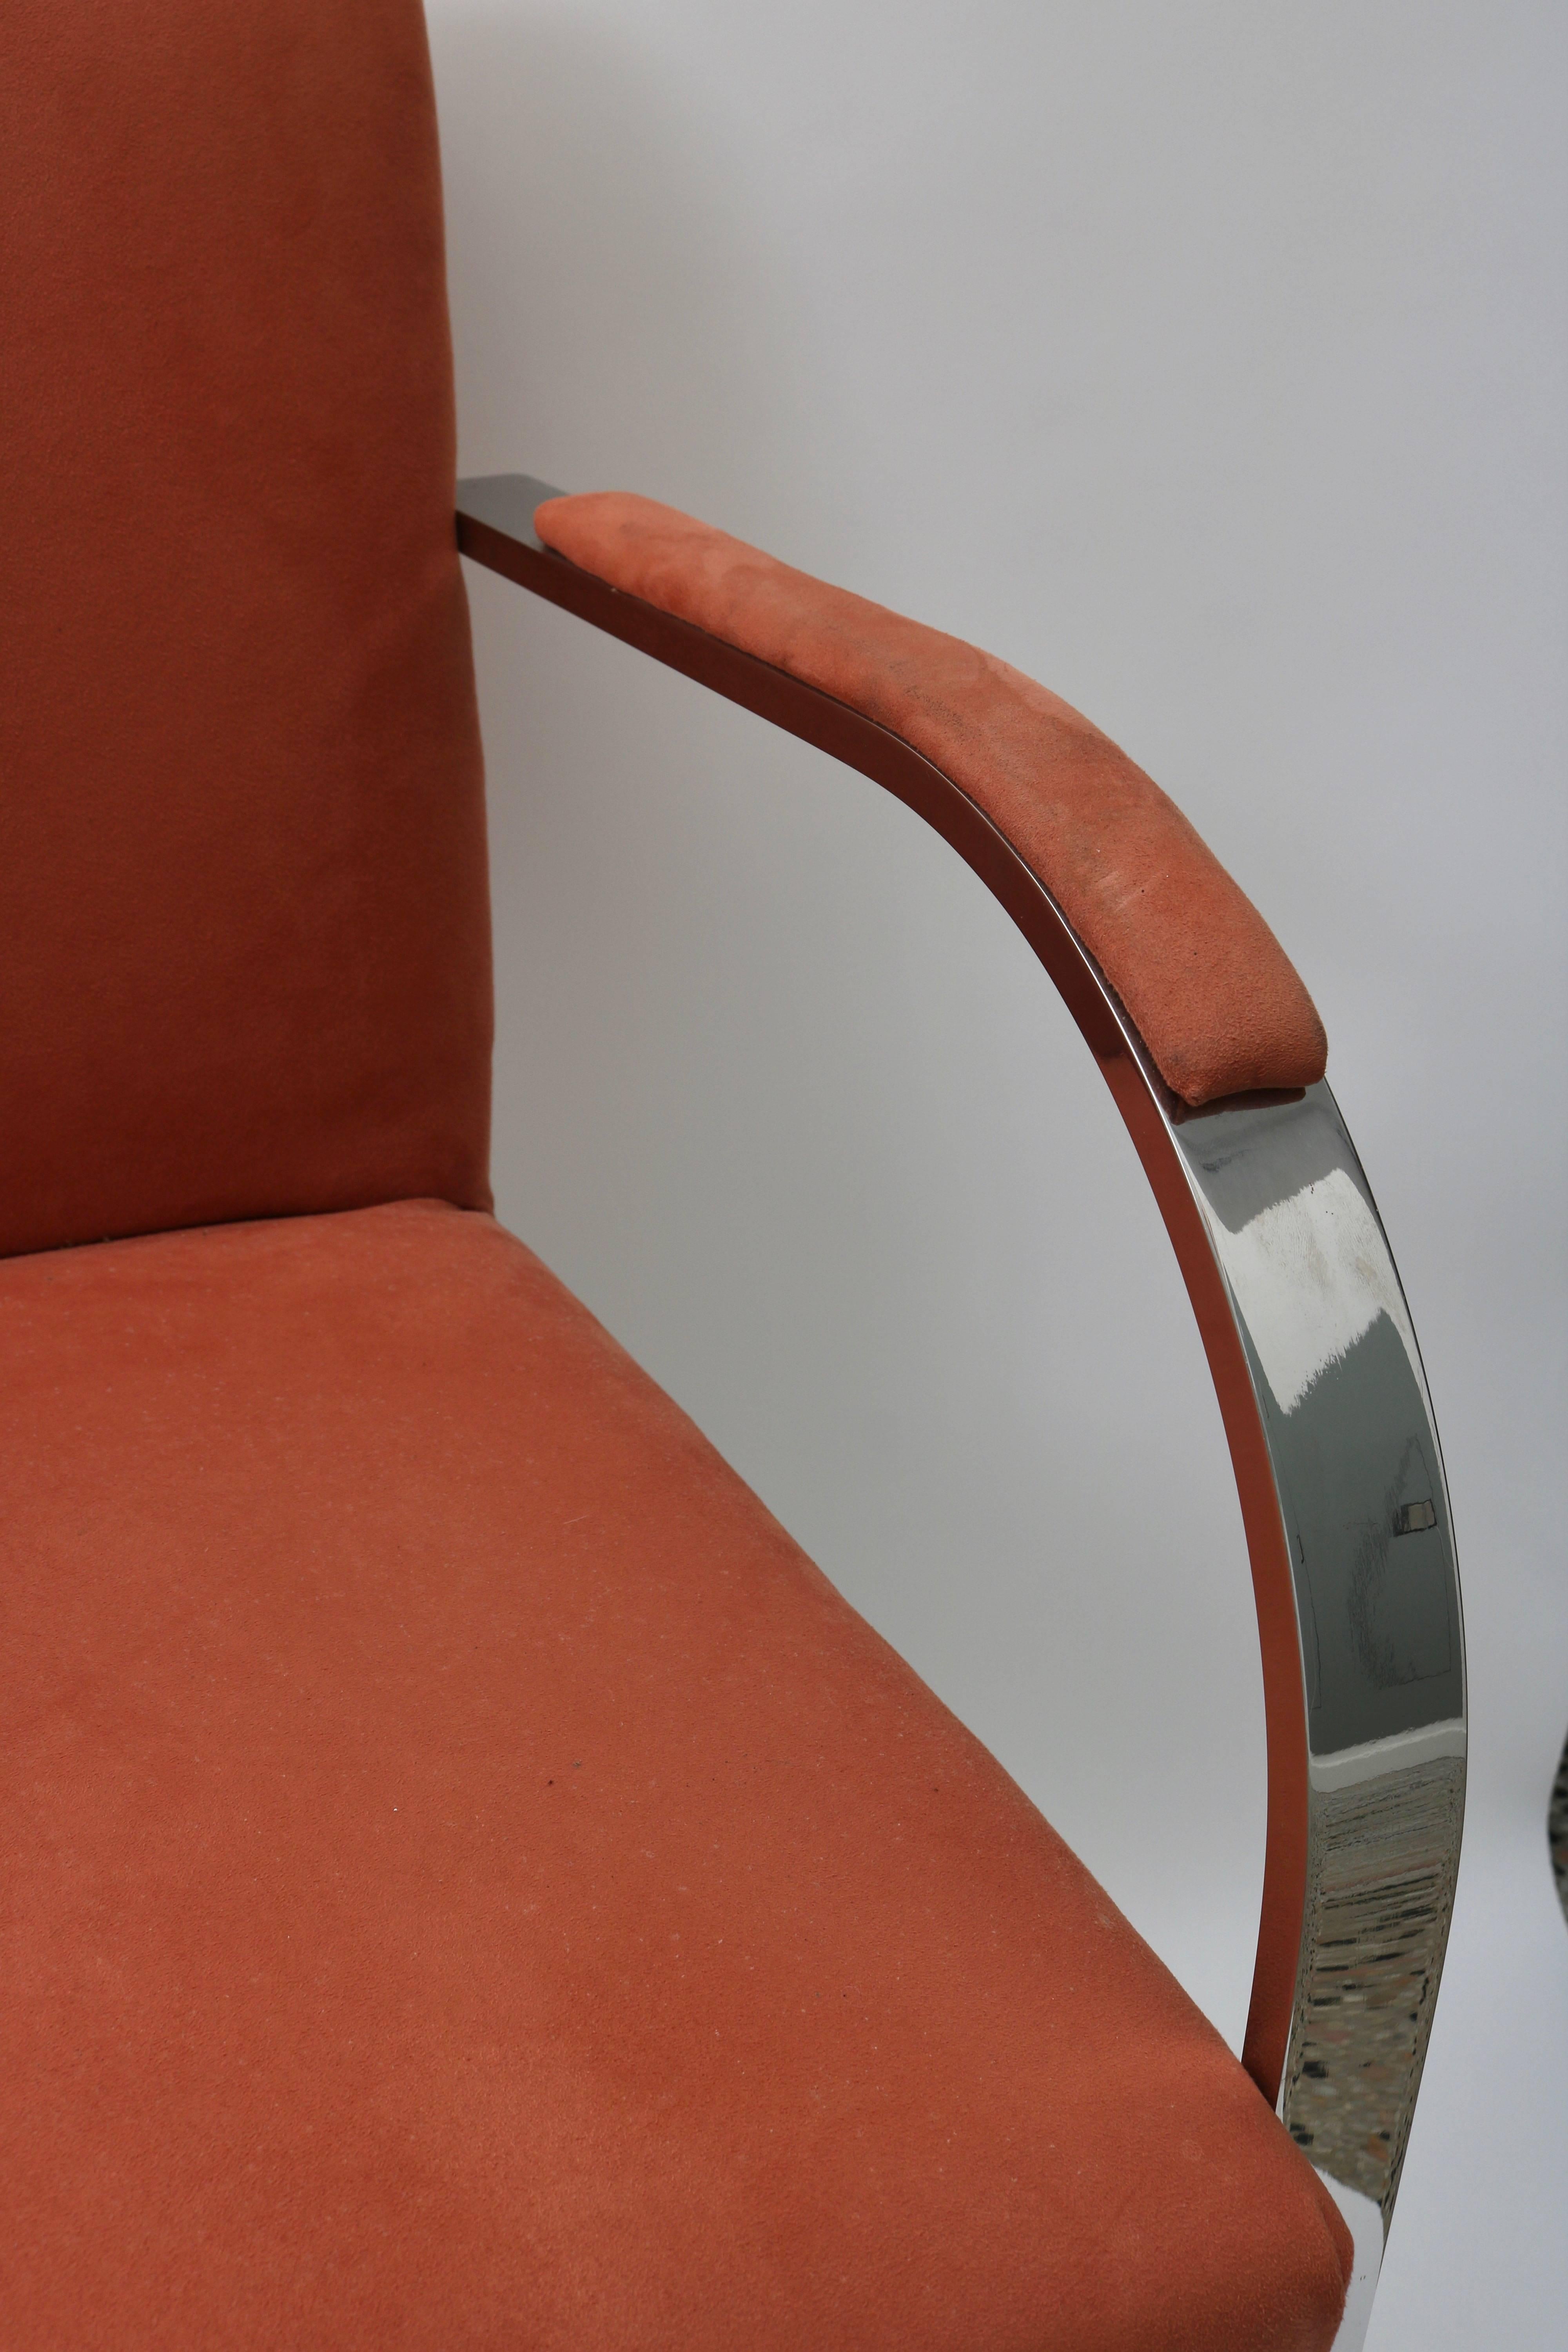 This set of six Brno chairs with their solid, polished steel frames date from the 1970s-1980s and are upholstered in a salmon colored ultra-suede fabric. The metal is in very good condition and the fabric does show wear.

Note: Arm height is 26.25